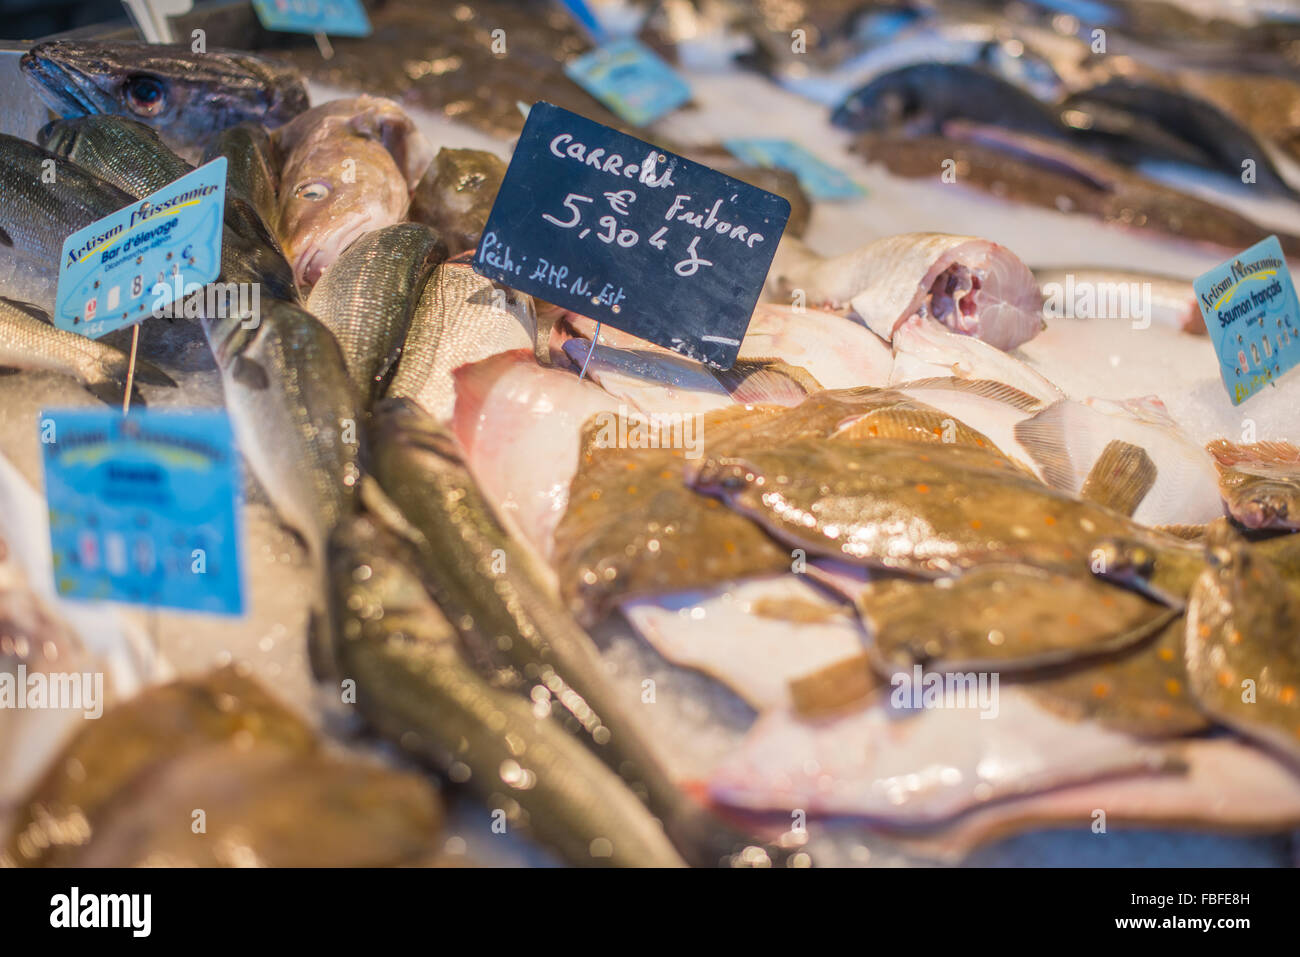 High Angle View Of Fish And Meat On Display At Store Stock Photo